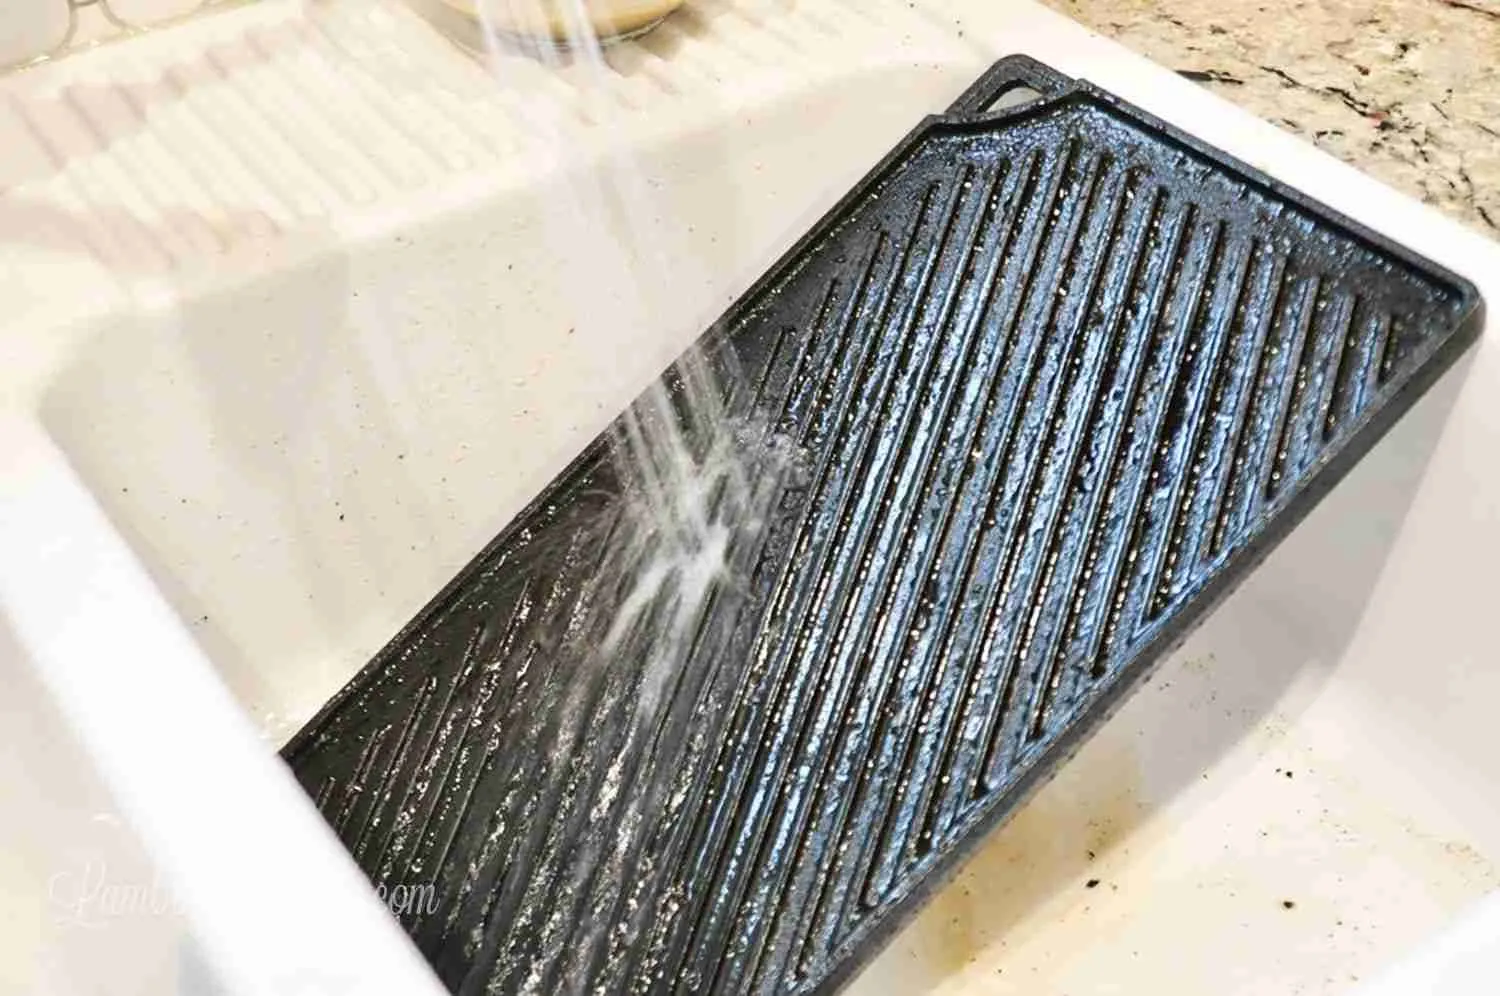 spraying water on a cast iron griddle in a sink